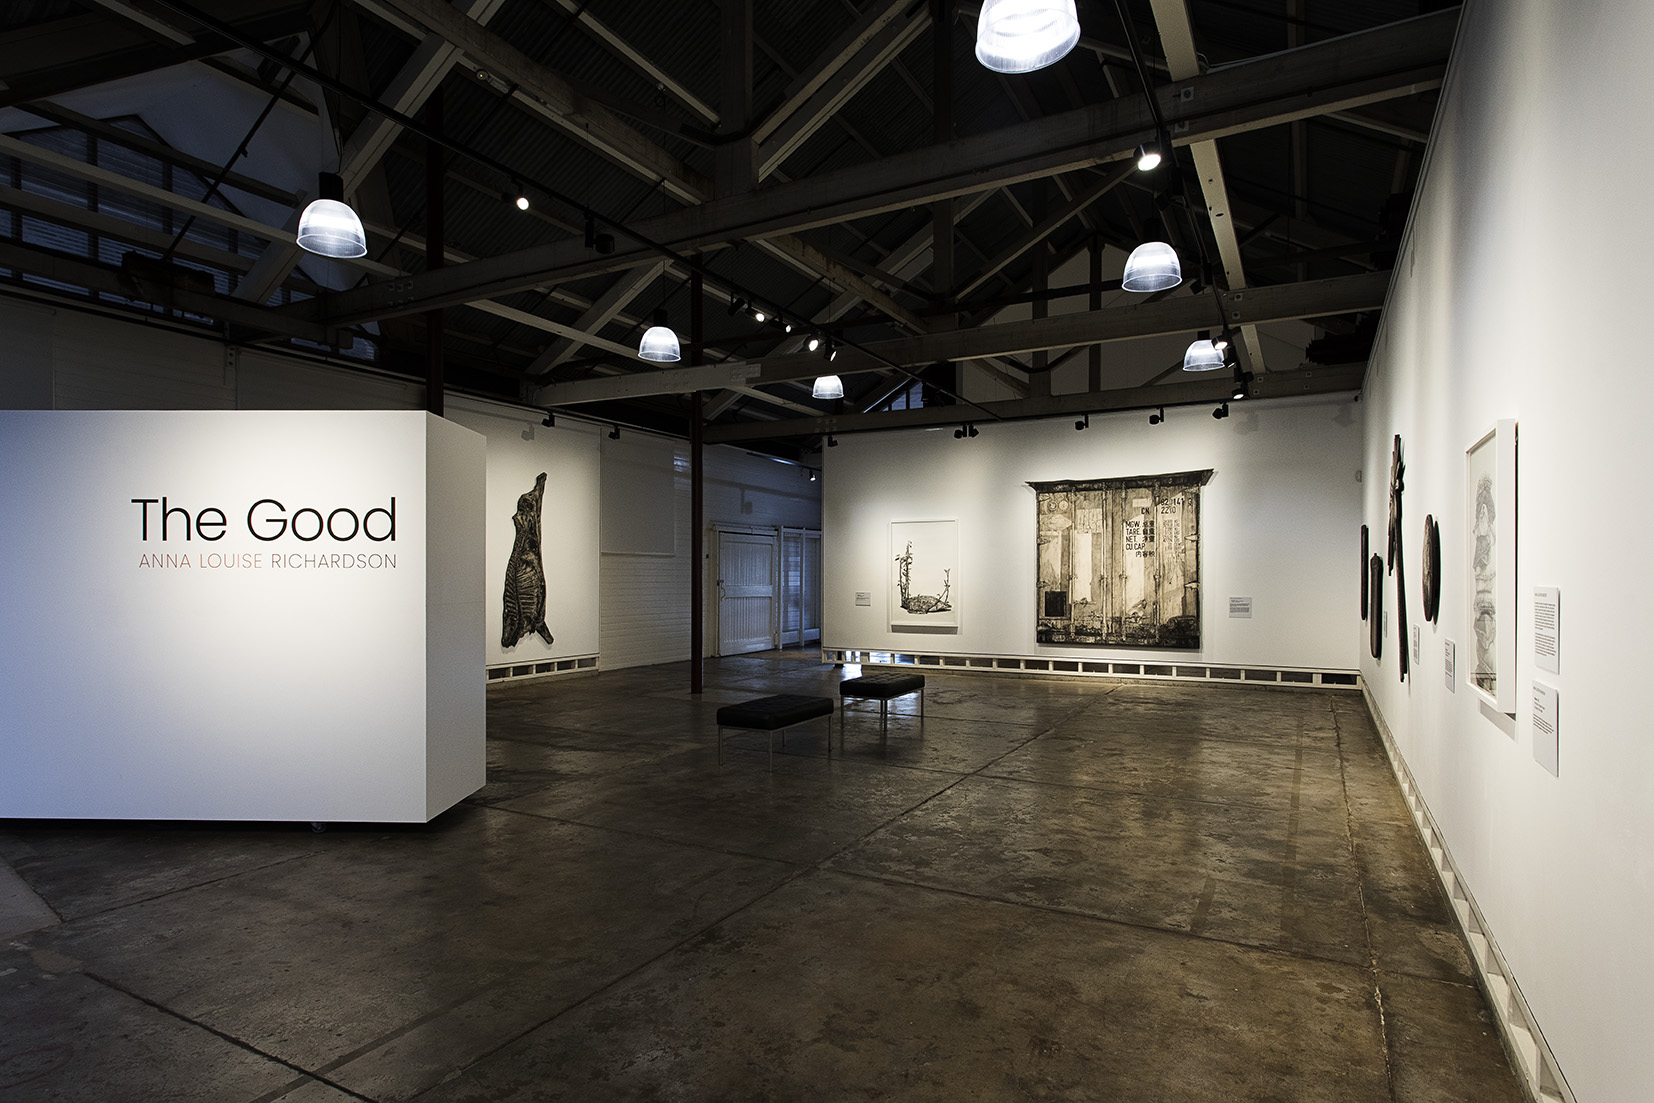 Anna Louise Richardson | The Good, exhibition view at The Condensery, Toogoolawah, QLD. Photo by Jim Filmer, Filmertography, 2023